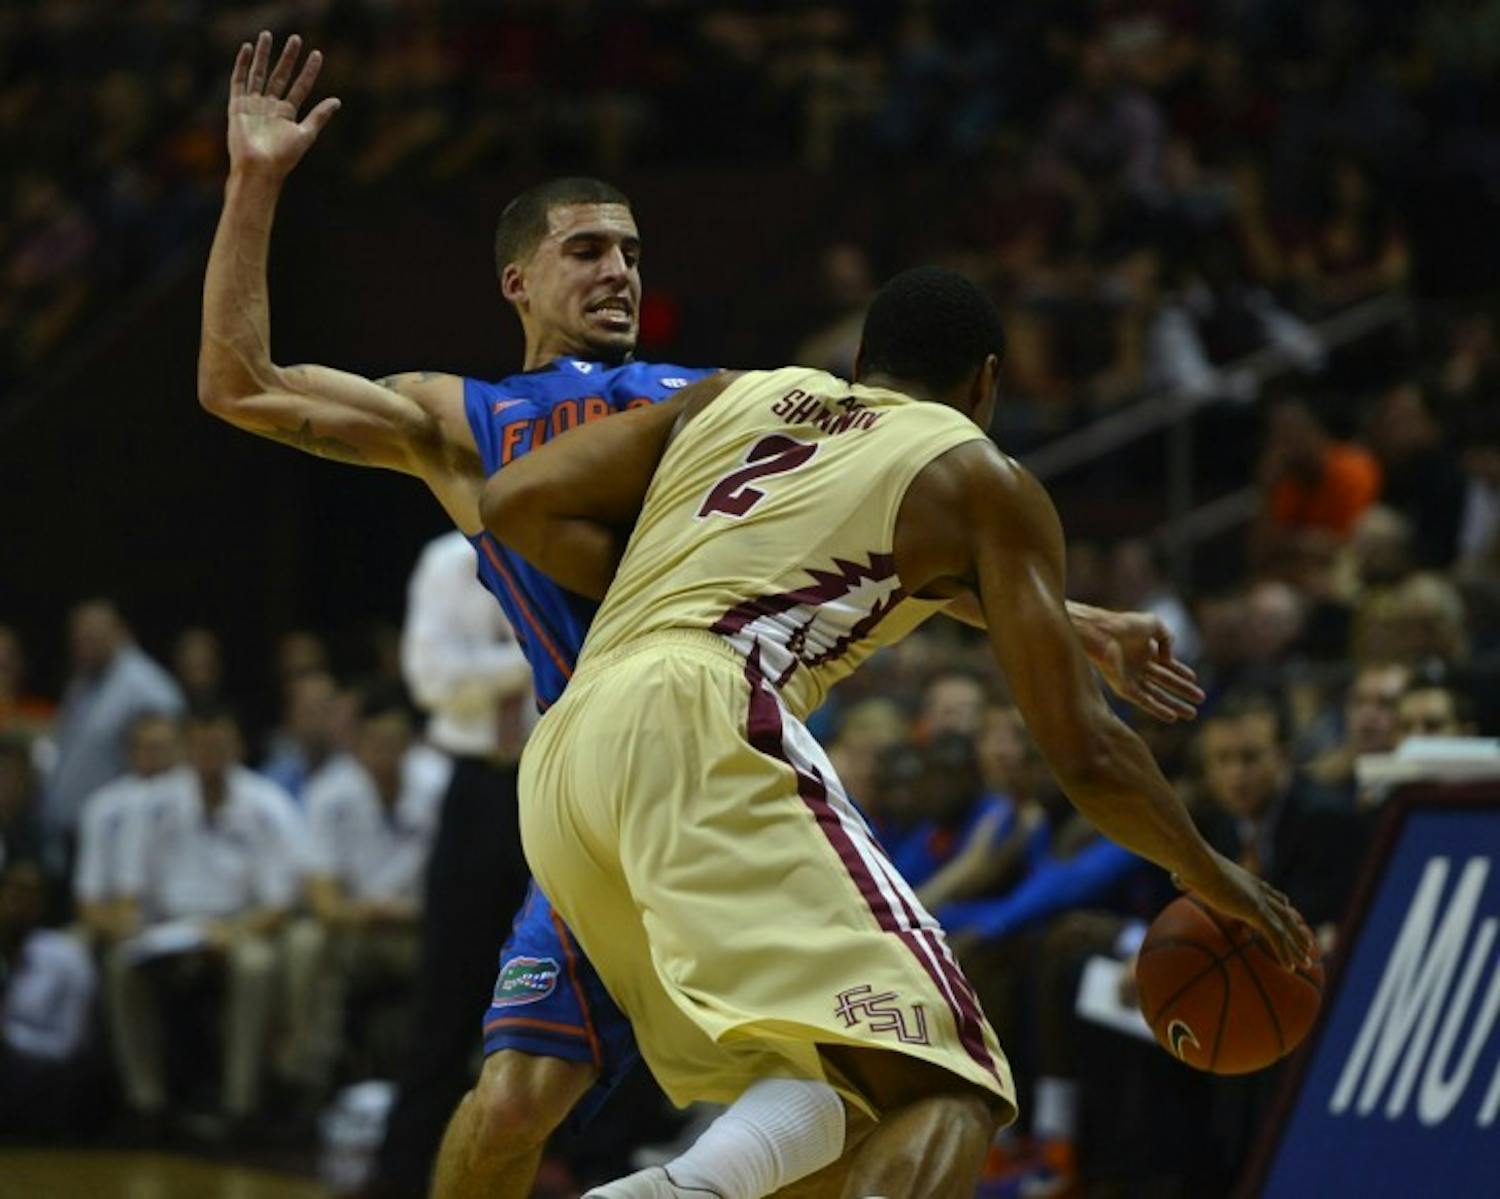 Junior guard Scottie Wilbekin blocks Florida State forward Terrance Shannon during Florida's 72-47 win against Florida State in Tallahassee on Wednesday, Dec. 5, 2012.